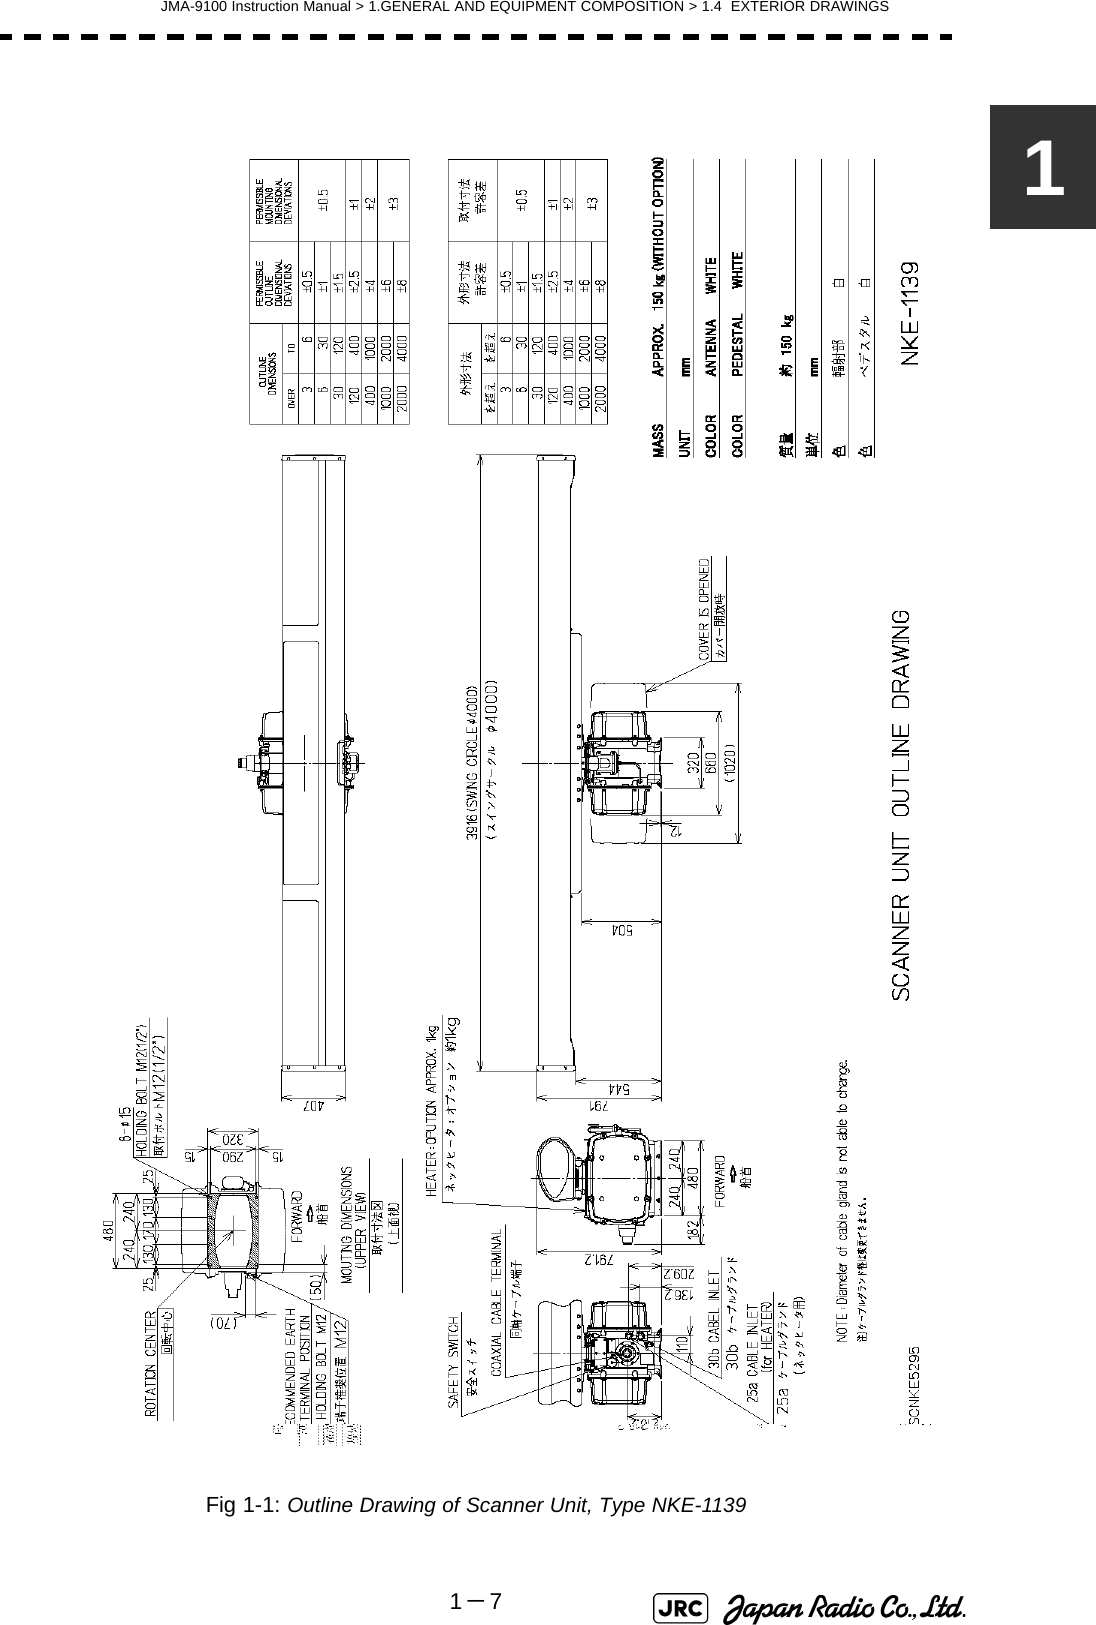 JMA-9100 Instruction Manual &gt; 1.GENERAL AND EQUIPMENT COMPOSITION &gt; 1.4  EXTERIOR DRAWINGS1－71Fig 1-1: Outline Drawing of Scanner Unit, Type NKE-1139